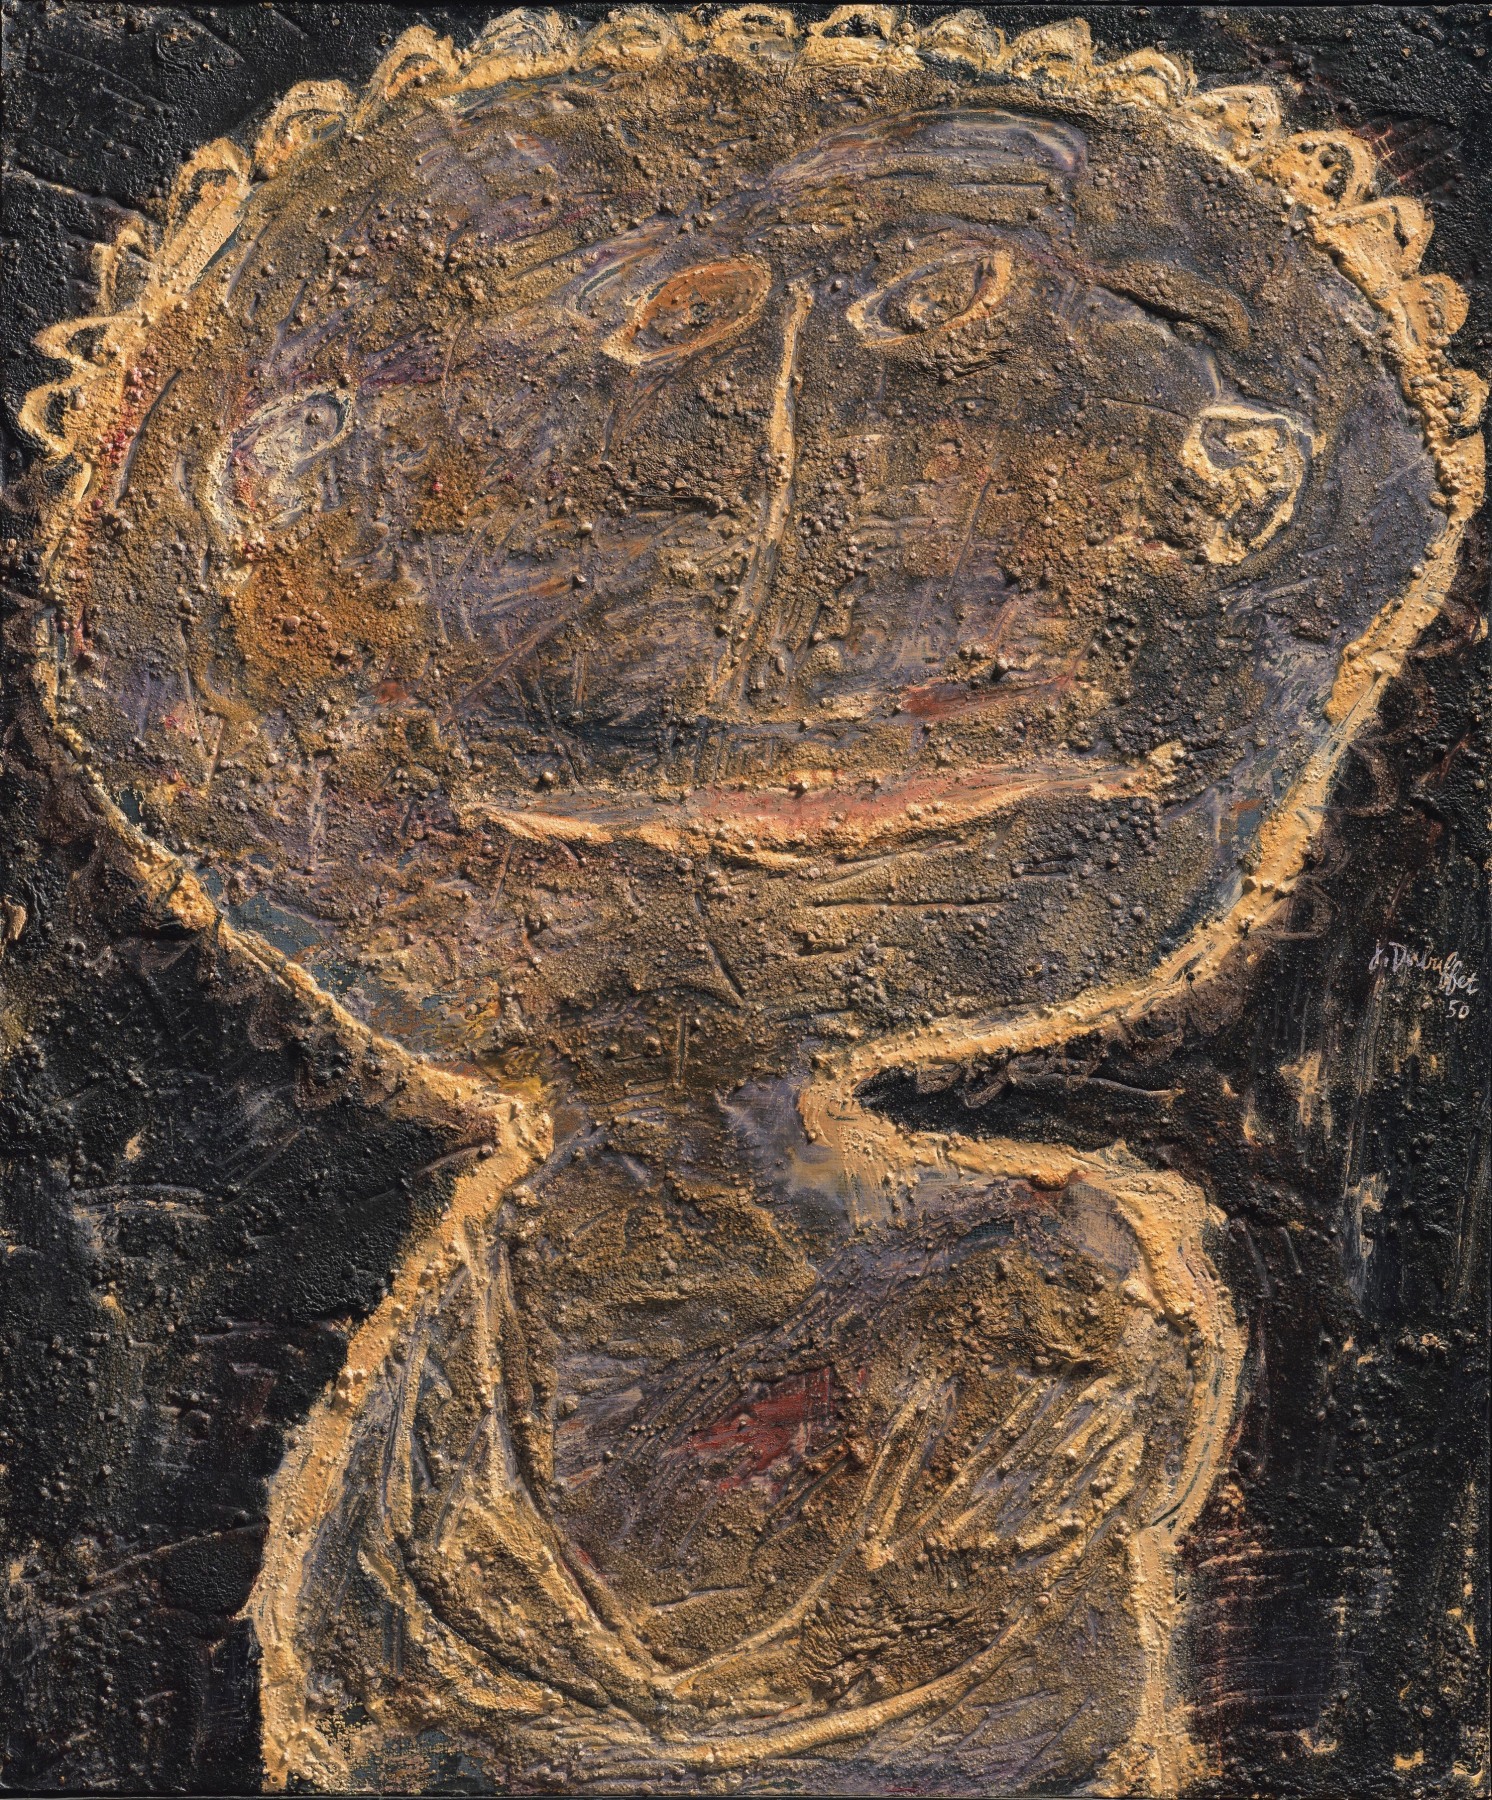 About the Artwork Jean Dubuffet. Le Teint Plombé. 1950. Oil and Sand on Masonite  by Jean Dubuffet